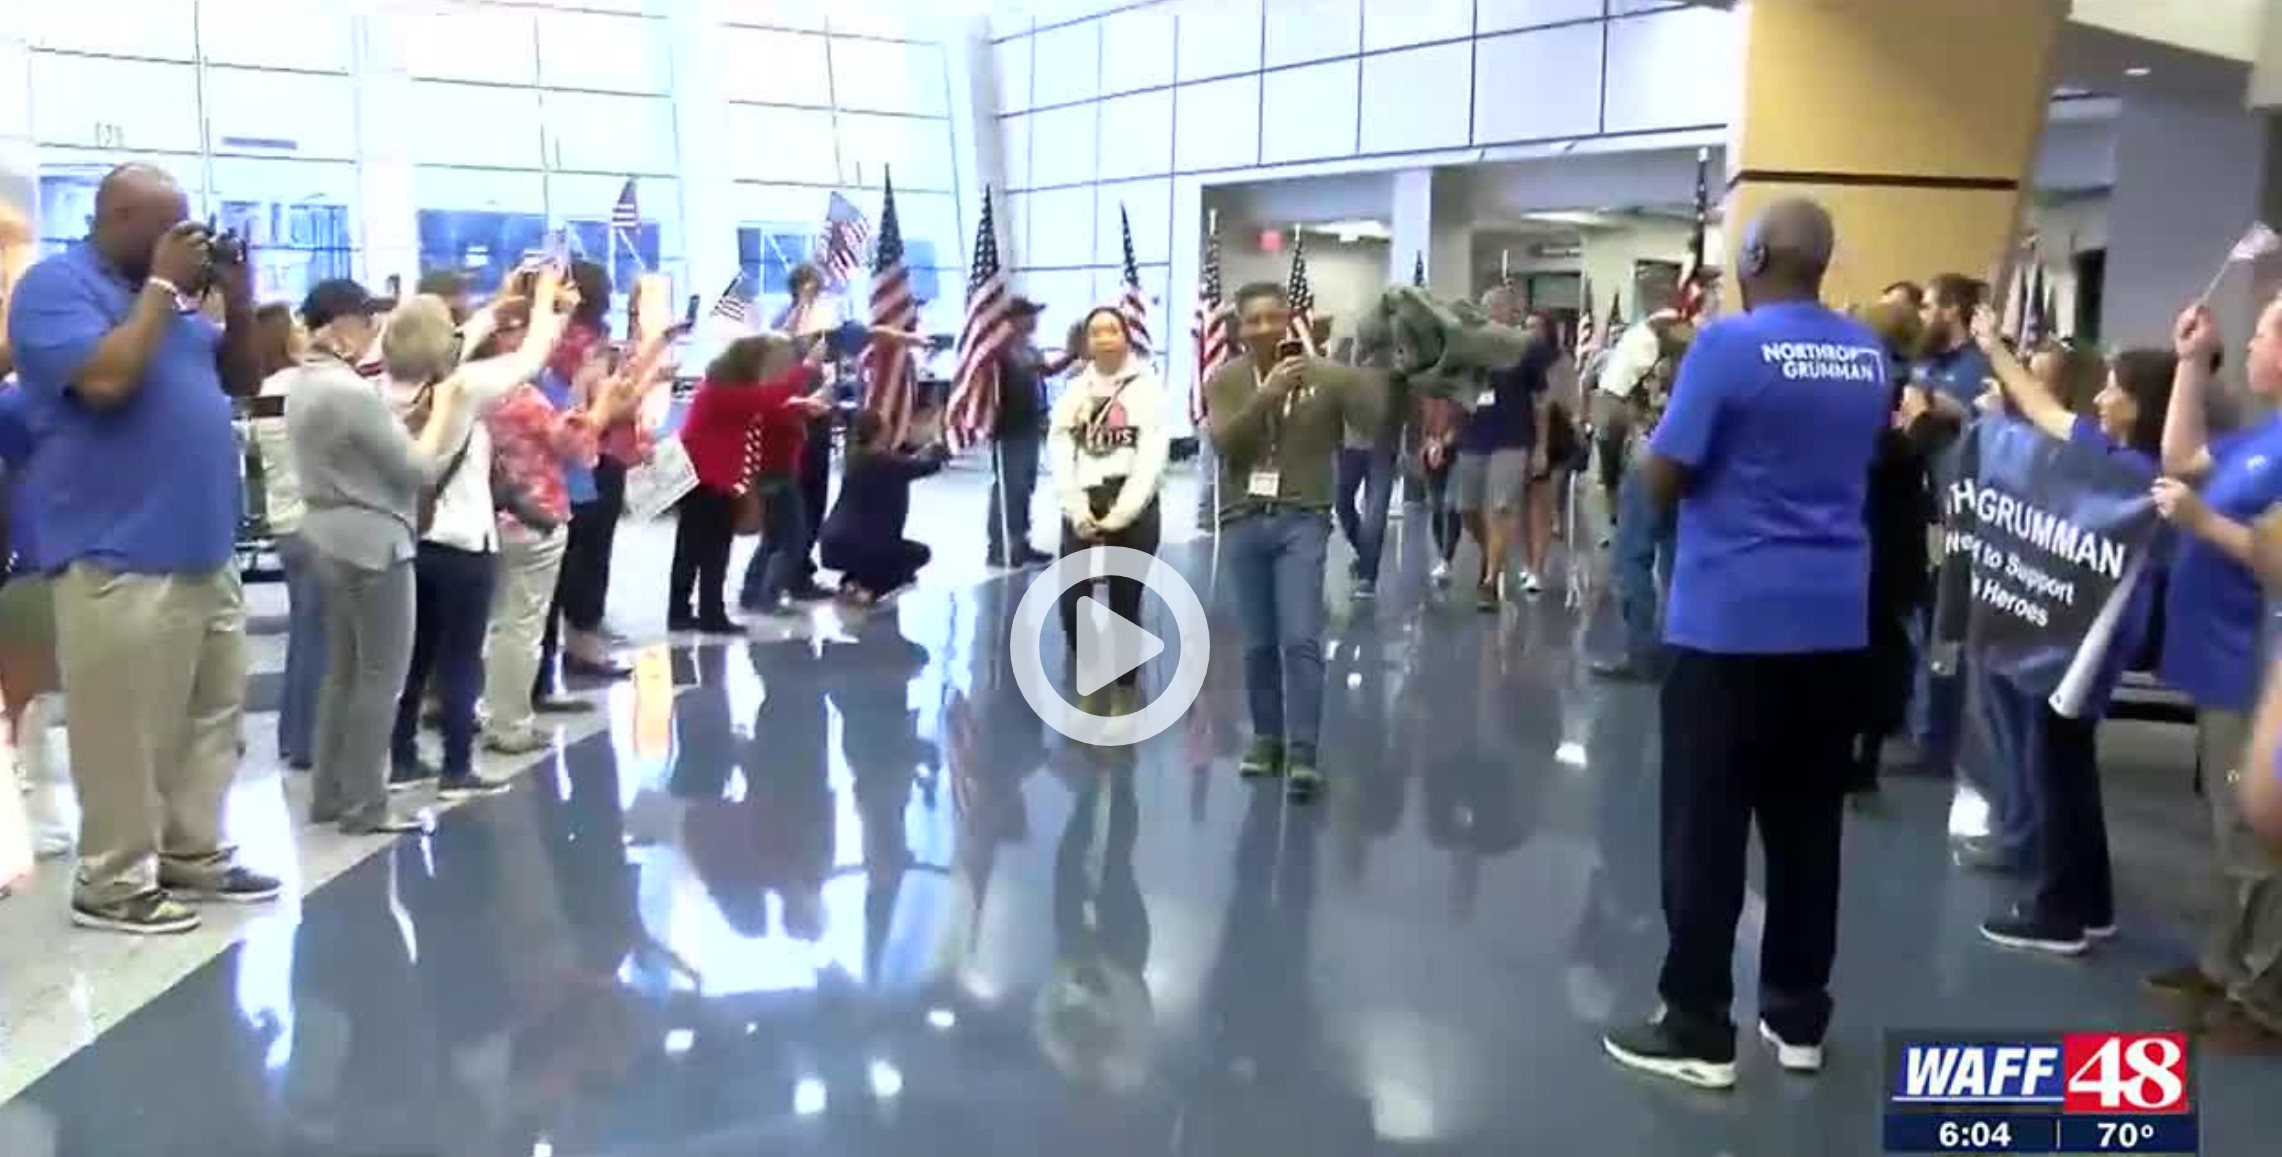 Screenshot of paused video coverage from WAFF 48 News of Veterans and caregivers arriving at the Huntsville International Airport to participate in Heroes Week 2022; shows people gathered and cheering along the walkway near the TSA exit, some holding large flags in a flagline, others taking photos of the incoming participants; and some incoming heroes are seen walking toward the camera. WAFF 48 logo and time stamp 6:04 PM in the bottom right corner.